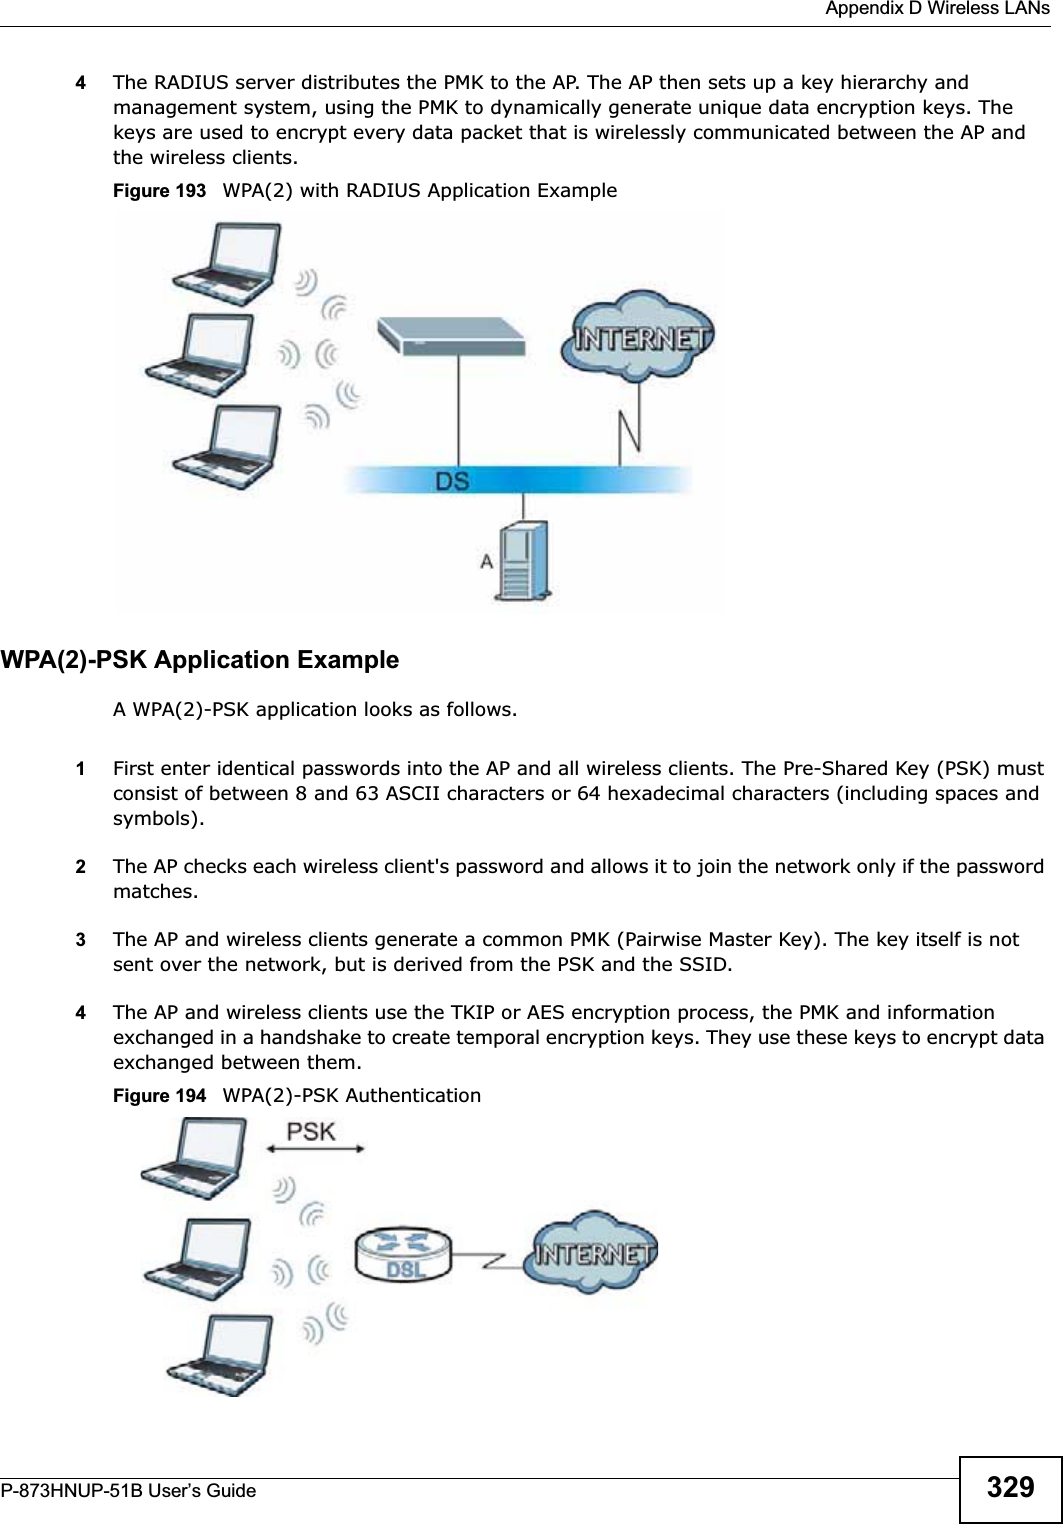  Appendix D Wireless LANsP-873HNUP-51B User’s Guide 3294The RADIUS server distributes the PMK to the AP. The AP then sets up a key hierarchy and management system, using the PMK to dynamically generate unique data encryption keys. The keys are used to encrypt every data packet that is wirelessly communicated between the AP and the wireless clients.Figure 193   WPA(2) with RADIUS Application ExampleWPA(2)-PSK Application ExampleA WPA(2)-PSK application looks as follows.1First enter identical passwords into the AP and all wireless clients. The Pre-Shared Key (PSK) must consist of between 8 and 63 ASCII characters or 64 hexadecimal characters (including spaces and symbols).2The AP checks each wireless client&apos;s password and allows it to join the network only if the password matches.3The AP and wireless clients generate a common PMK (Pairwise Master Key). The key itself is not sent over the network, but is derived from the PSK and the SSID. 4The AP and wireless clients use the TKIP or AES encryption process, the PMK and information exchanged in a handshake to create temporal encryption keys. They use these keys to encrypt data exchanged between them.Figure 194   WPA(2)-PSK Authentication